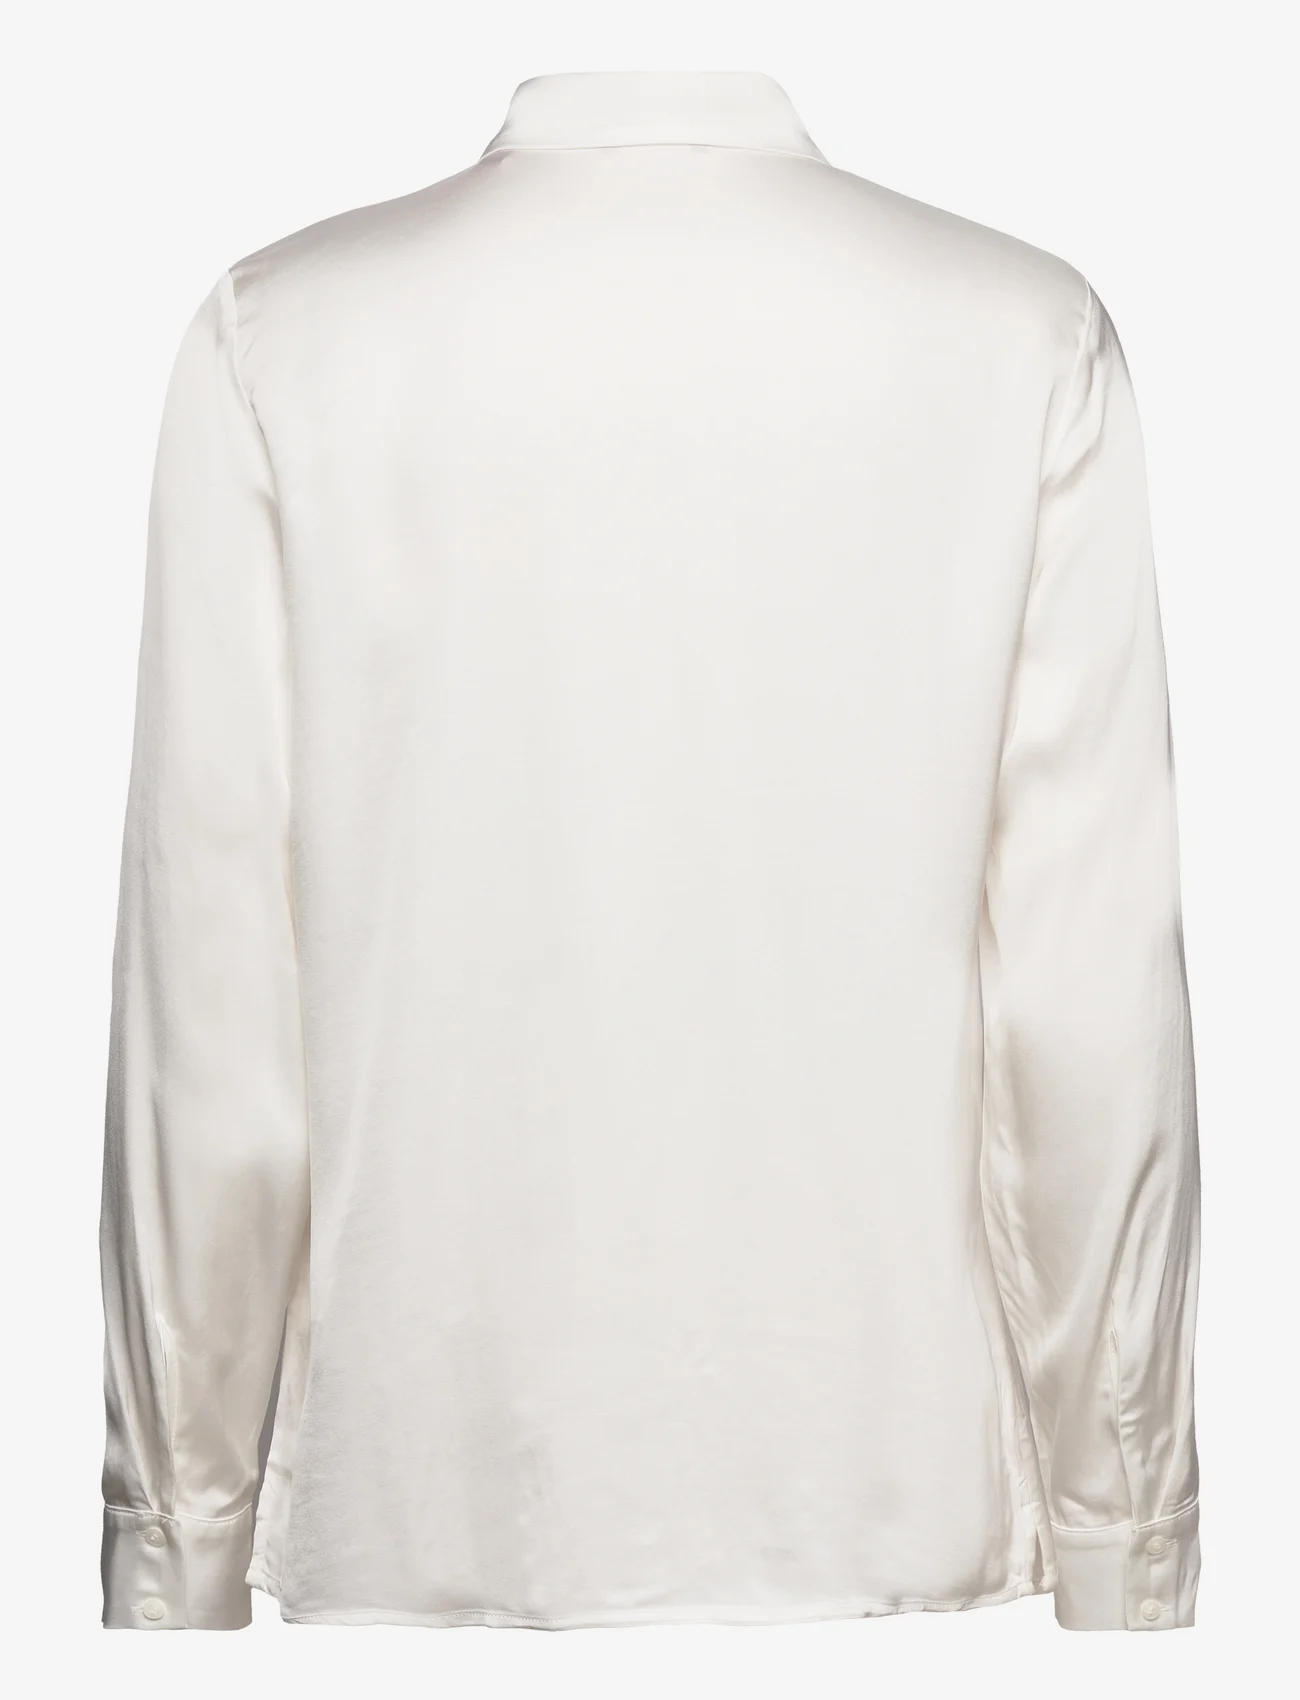 Esprit Casual - Blouses woven - long-sleeved blouses - off white - 1